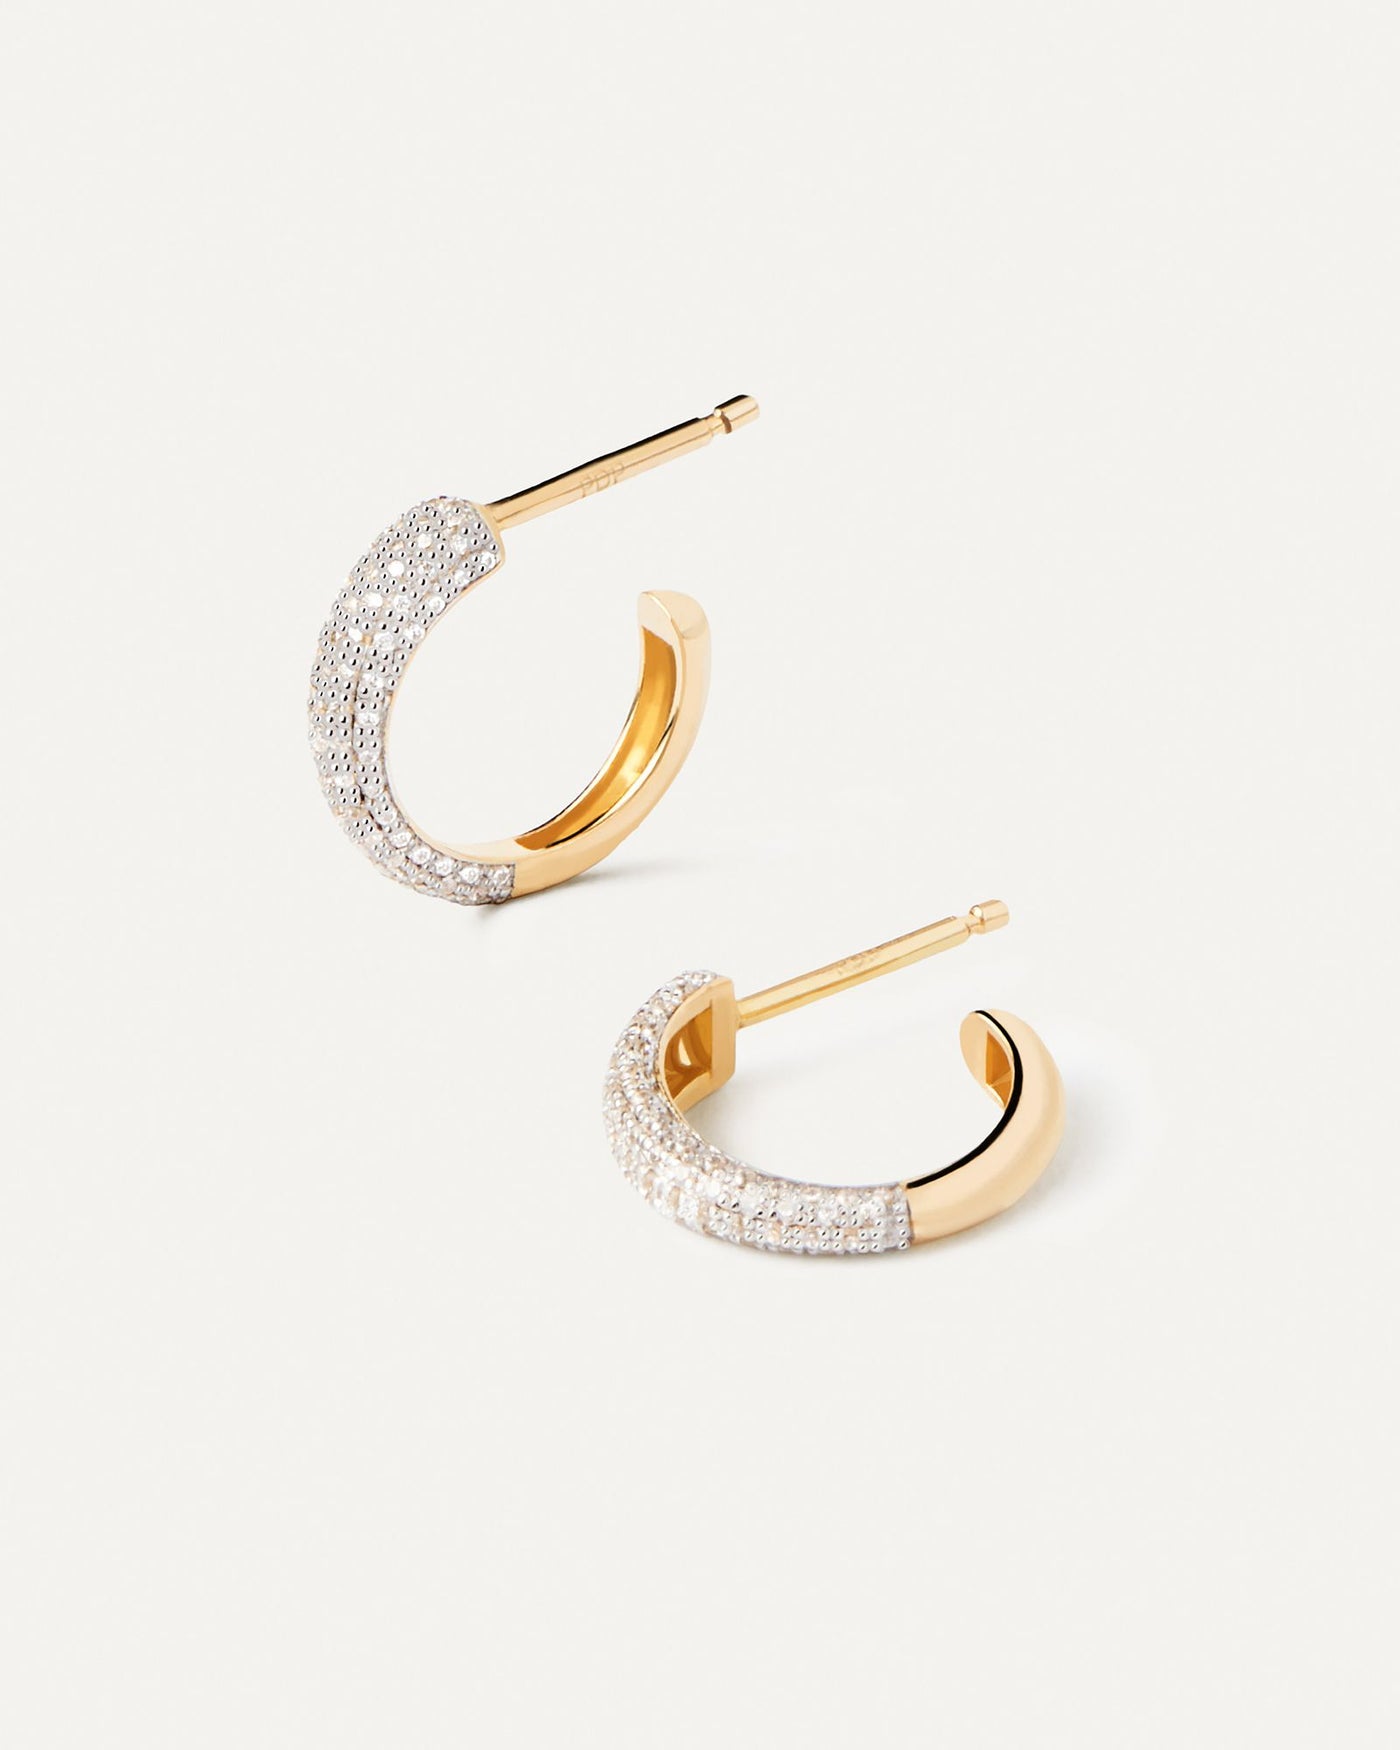 2024 Selection | Diamonds and Gold Soho Mini Hoops. Small hoop earrings in solid yellow gold with 81 pavé diamonds of 0.23 carats. Get the latest arrival from PDPAOLA. Place your order safely and get this Best Seller. Free Shipping.